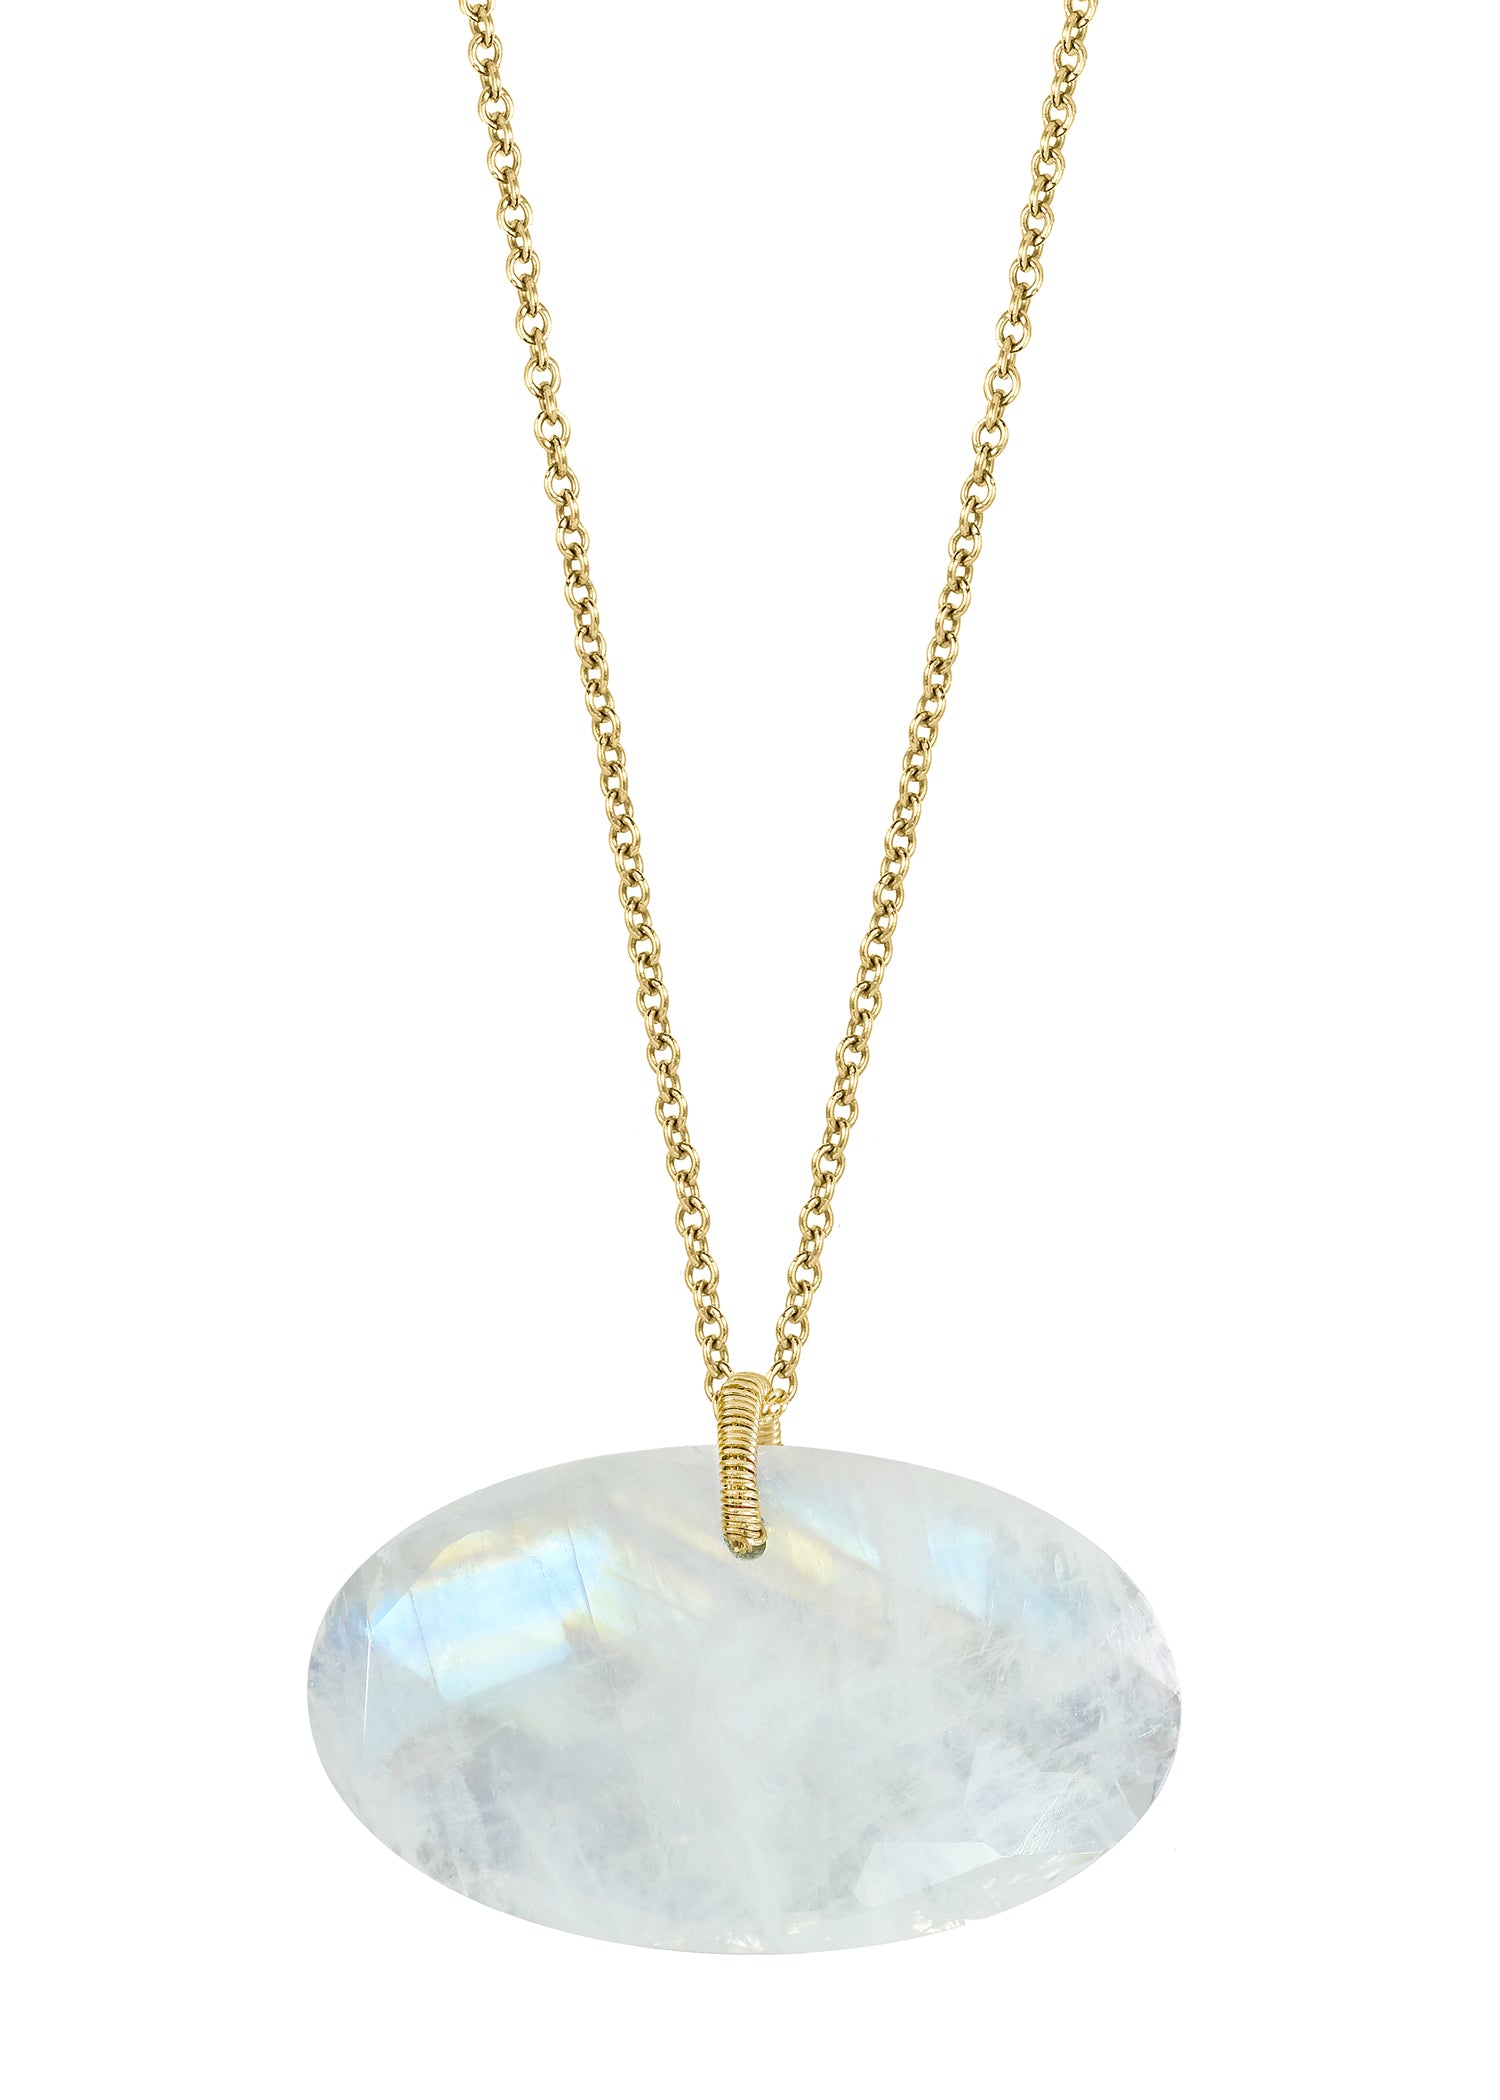 Rainbow moonstone 14k gold Special order only Necklace measures 16" in length Pendant measures 3/4" in length and 1-1/8" in width Handmade in our Los Angeles studio